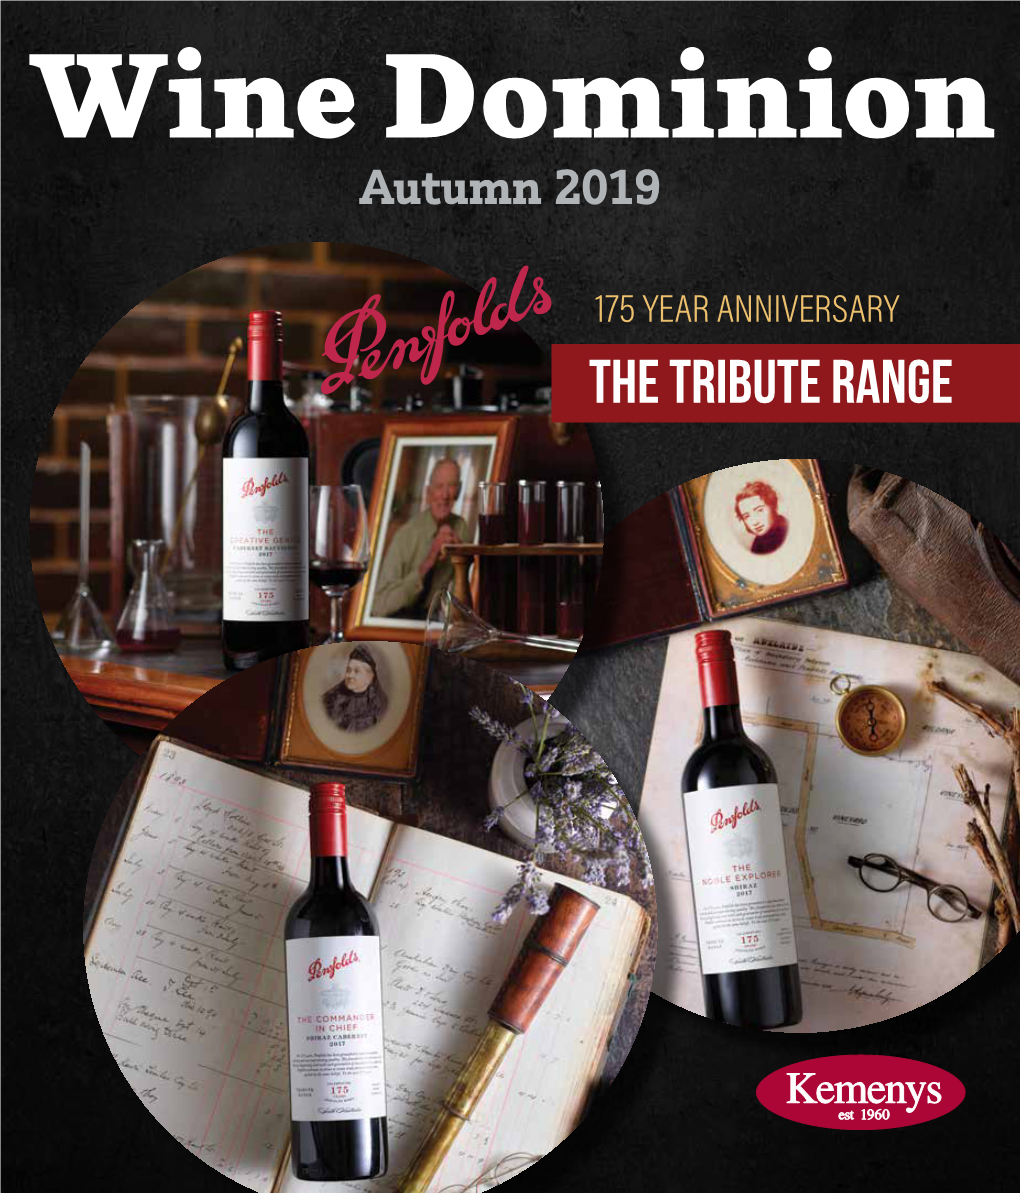 The Tribute Range in This Edition PENFOLDS 175 YEARS of INNOVATIVE WINEMAKING TRIBUTE RANGE